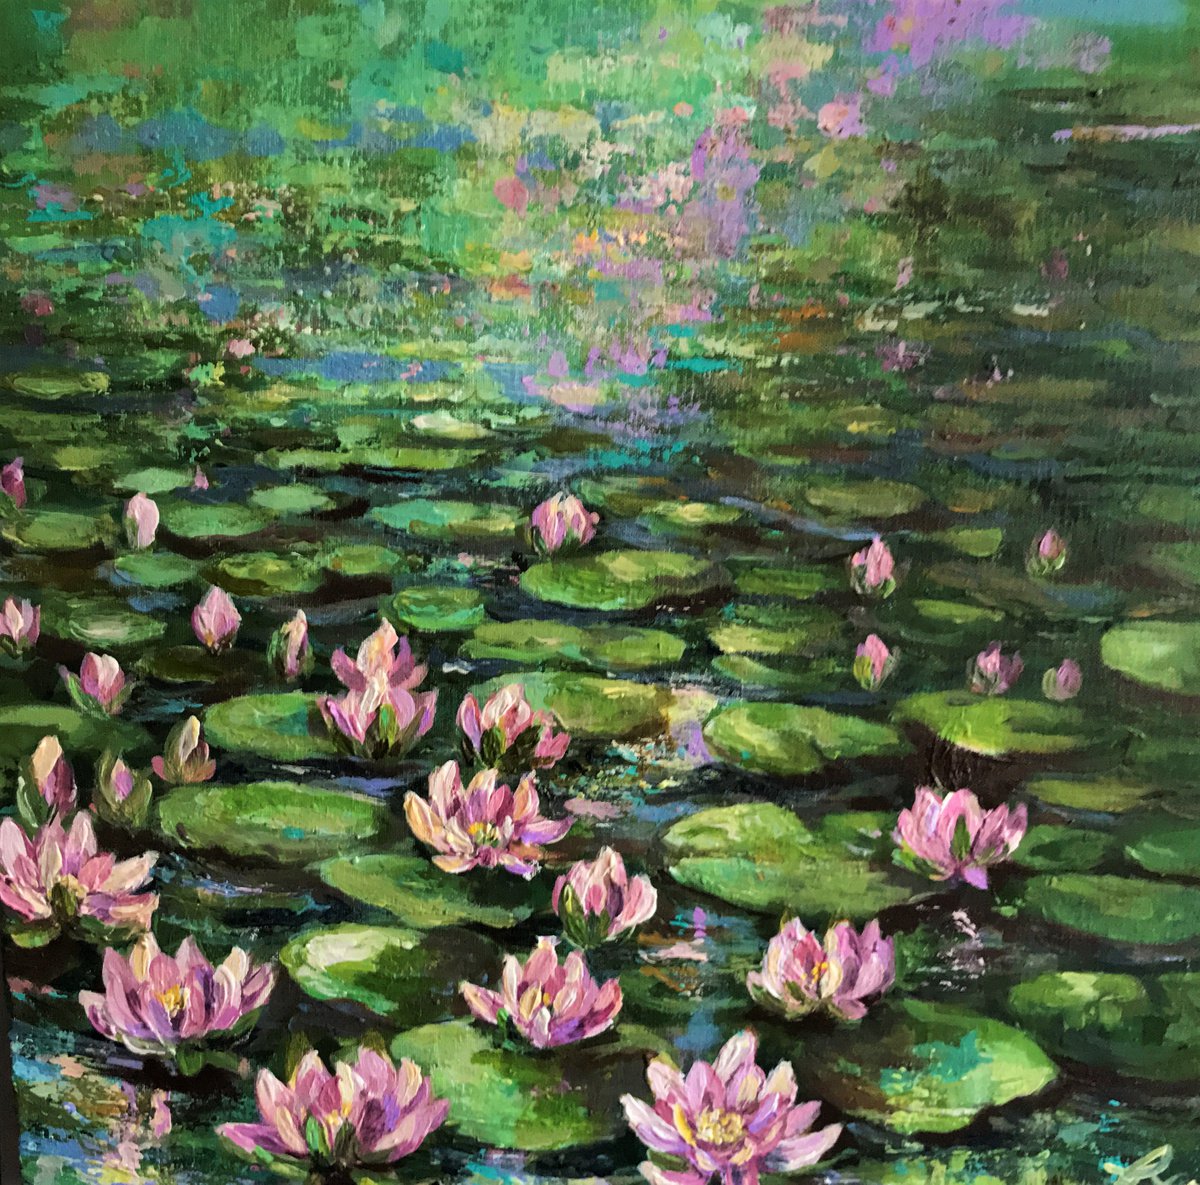 Lilly Pond no6 by Colette Baumback